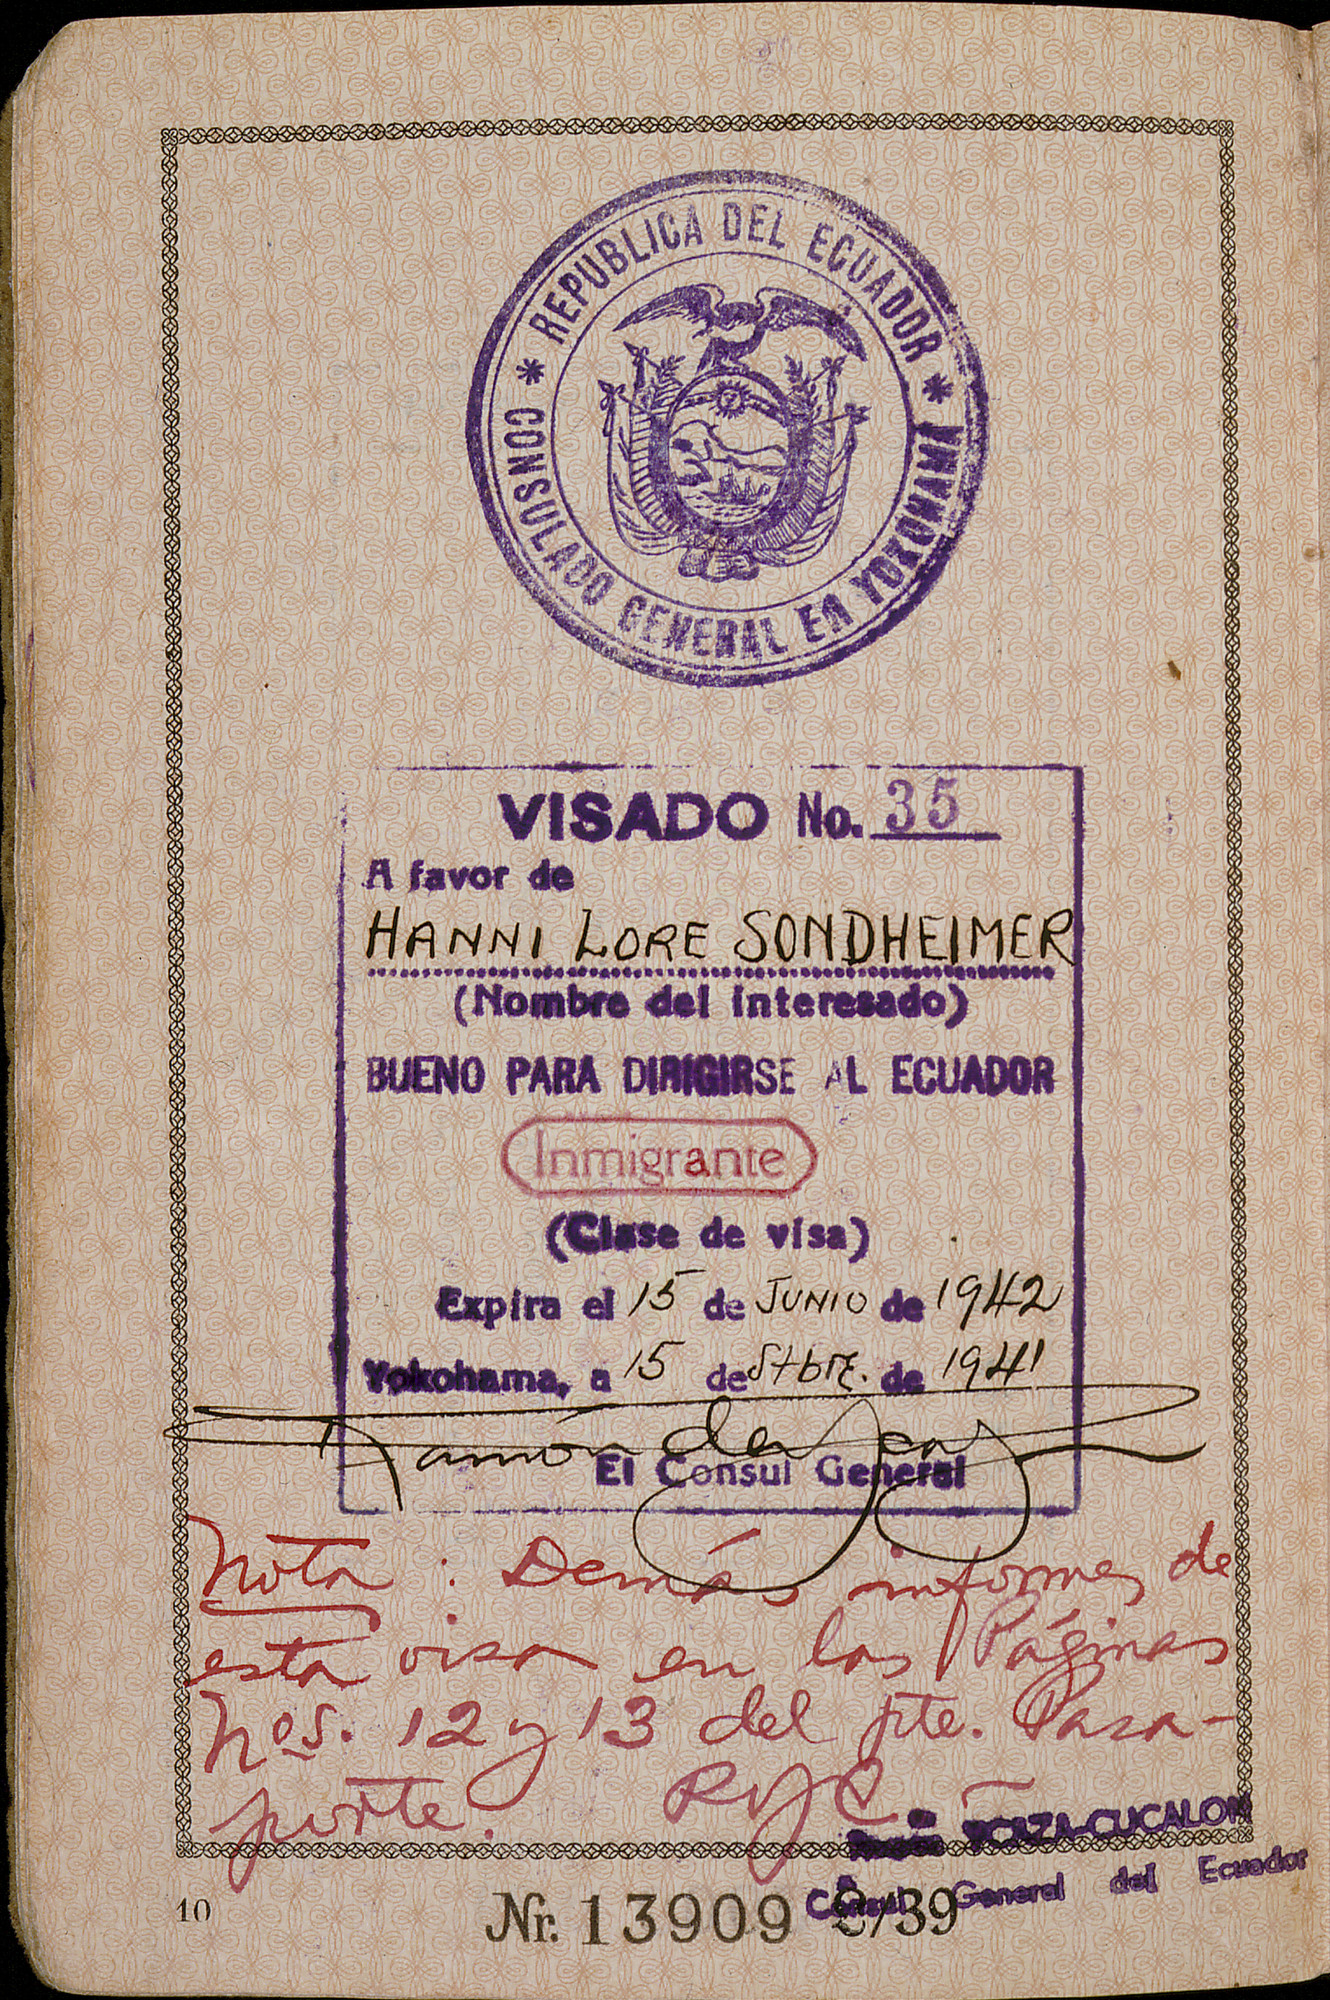 German passport issued to Hanni Sondheimer by the German Consulate in Kaunas.

German Jews were commonly required to add "Israel" to their names if male, and "Sara" if female.  Jewish passports were further distinguished by a "J," signifying "Jude" (Jew), stamped in red on the first page.